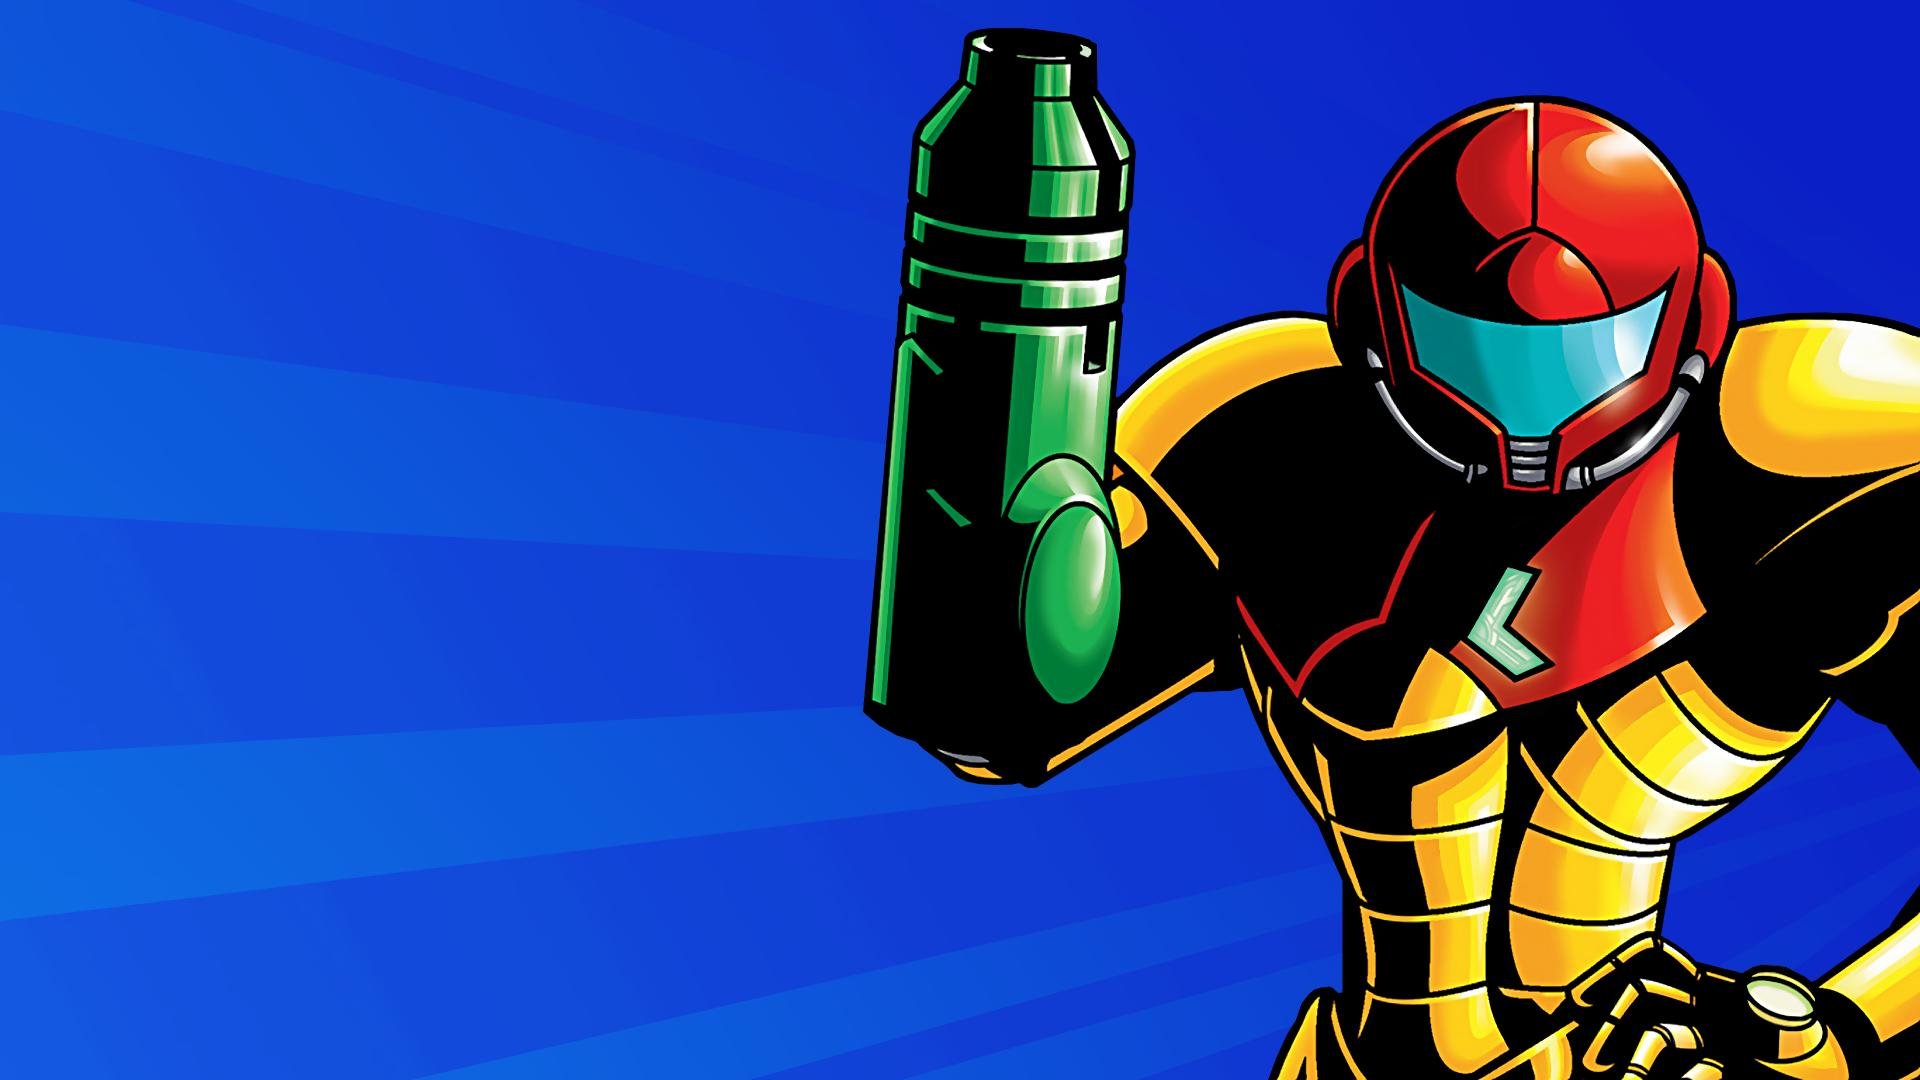 Download full hd 1920x1080 Metroid desktop background ID:405521 for free